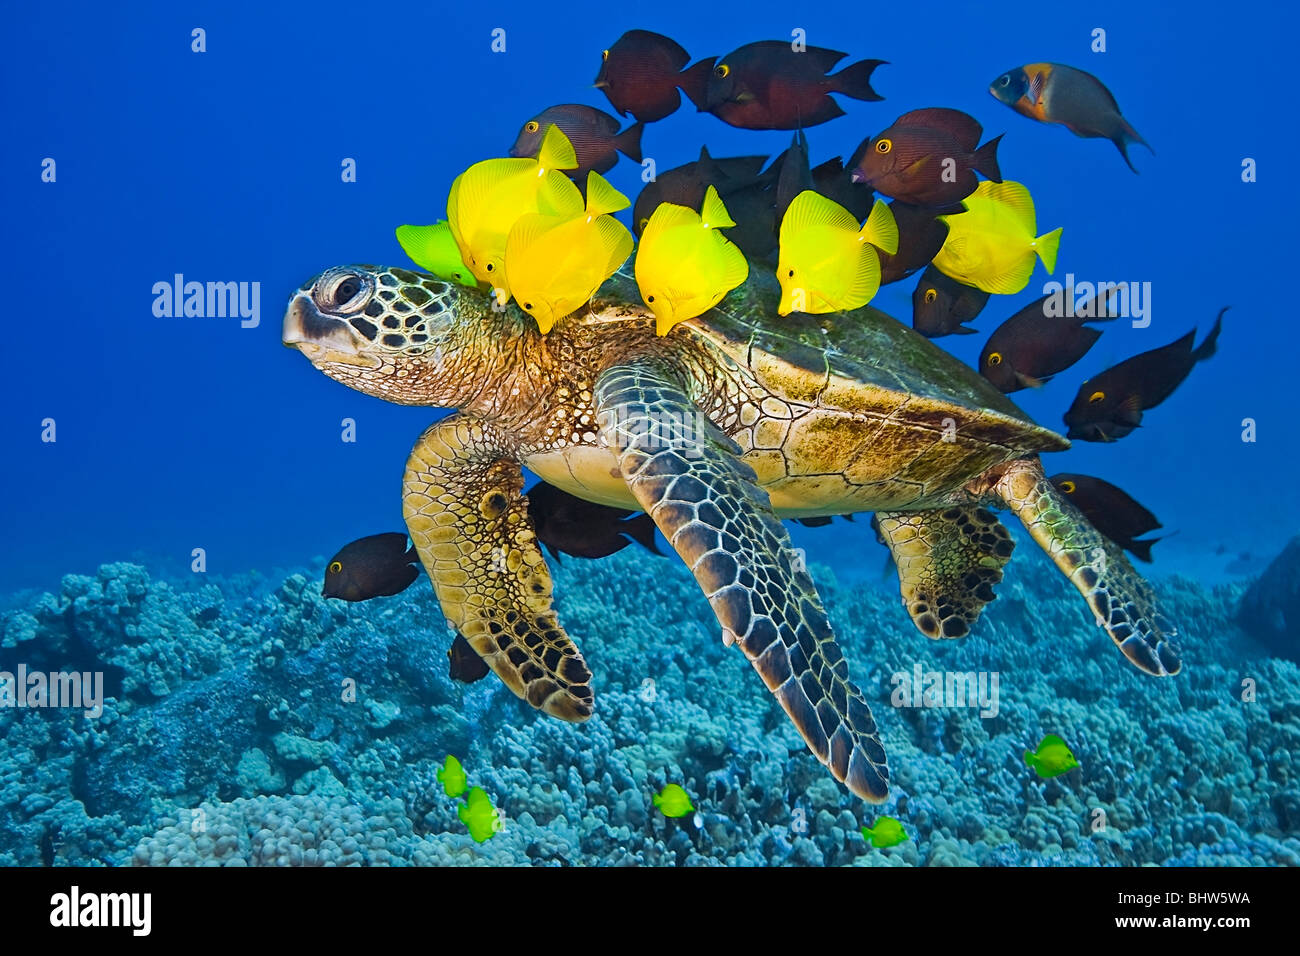 endangered green sea turtle, Chelonia mydas, cleaned by yellow tang, surgeonfish & endemic saddle wrasse, Hawaii, Pacific Ocean Stock Photo